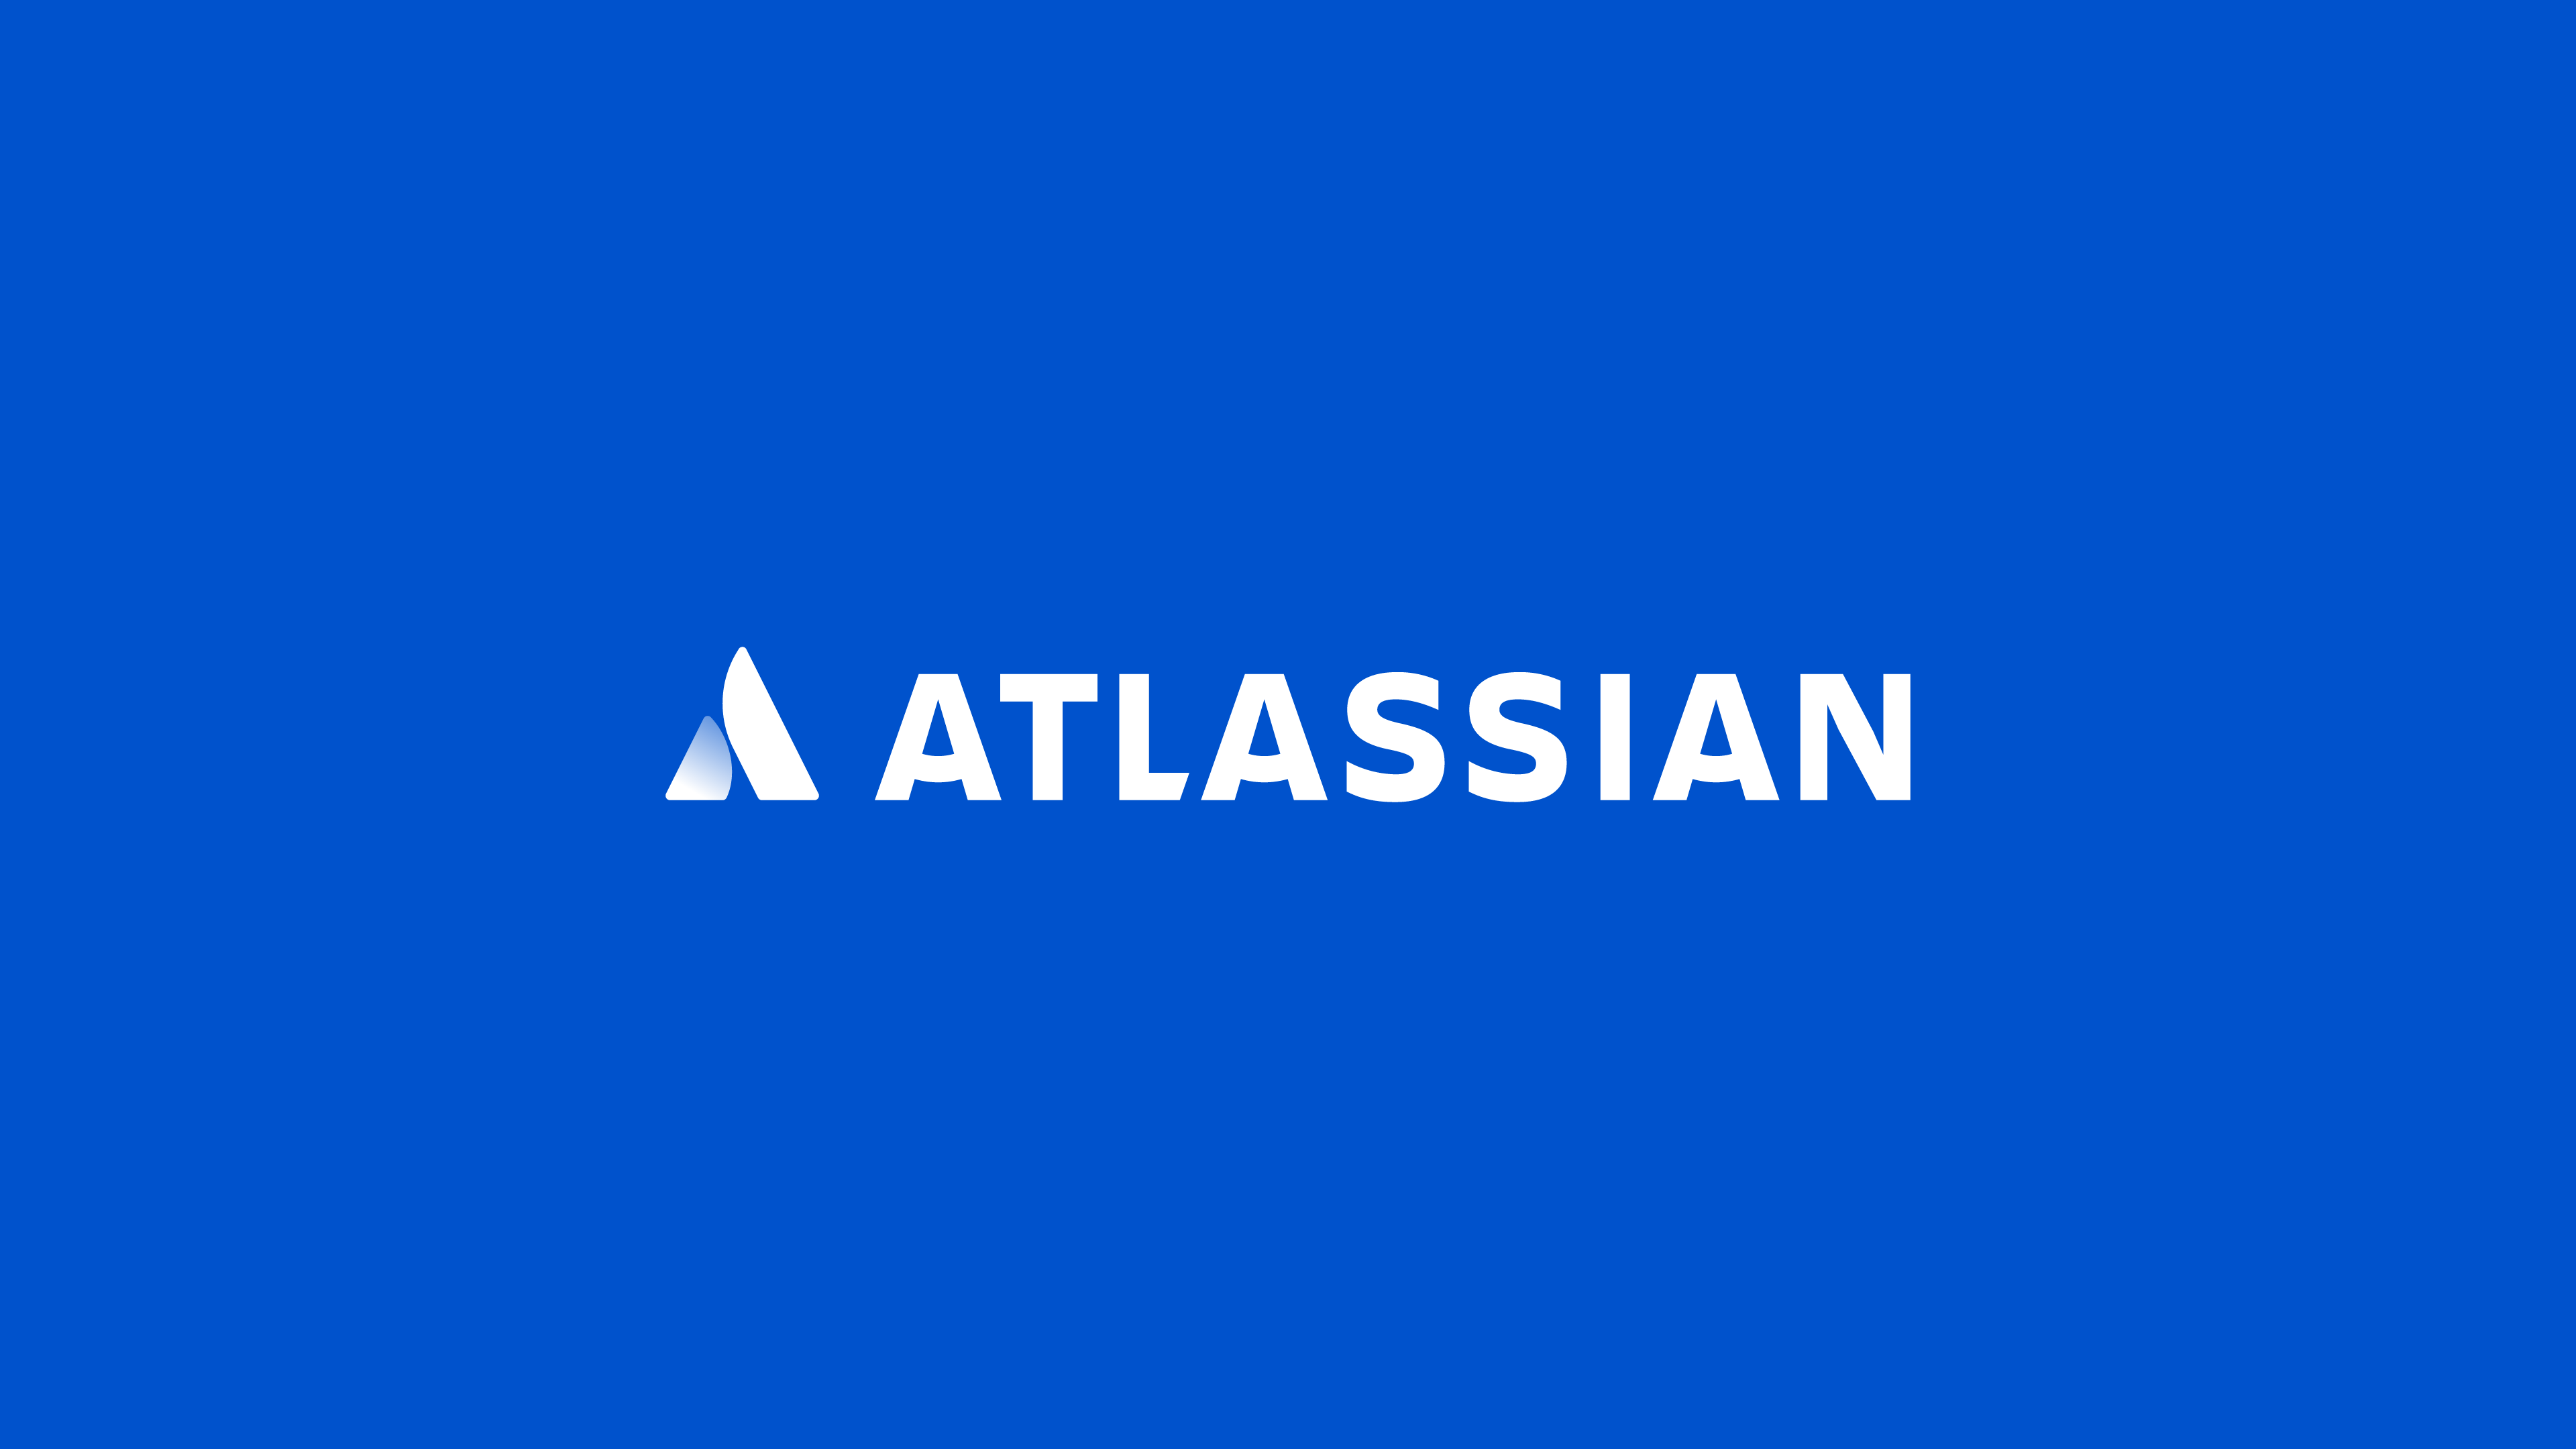 Why Atlassian Shares Are Surging After Hours Thursday